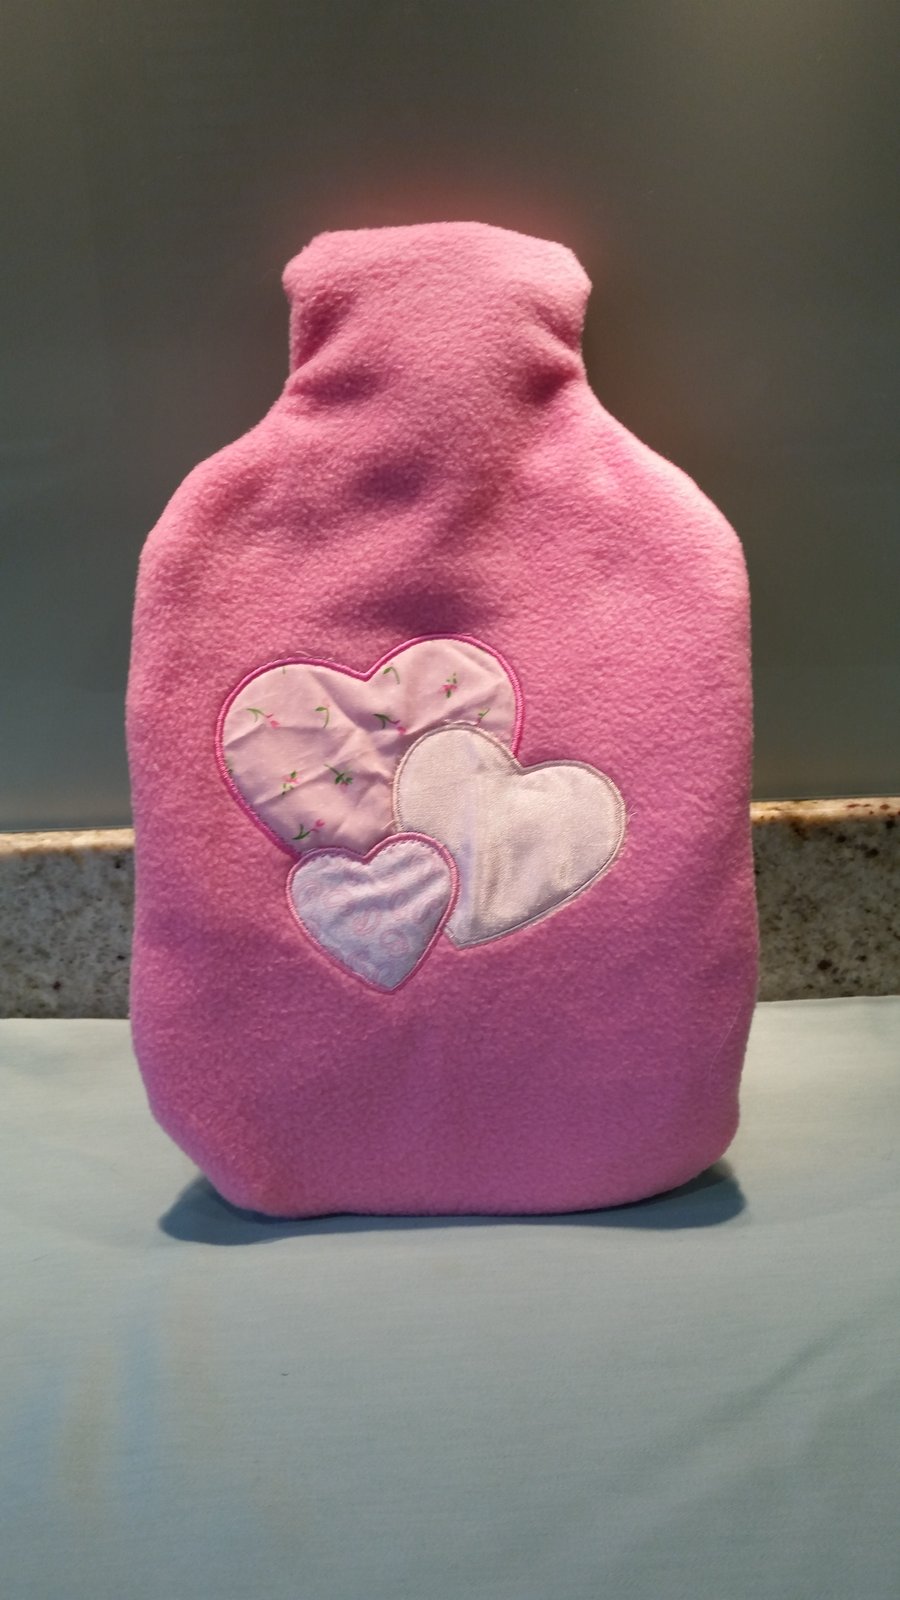 Hot water bottle & cover made from fleece with appliqued heart design